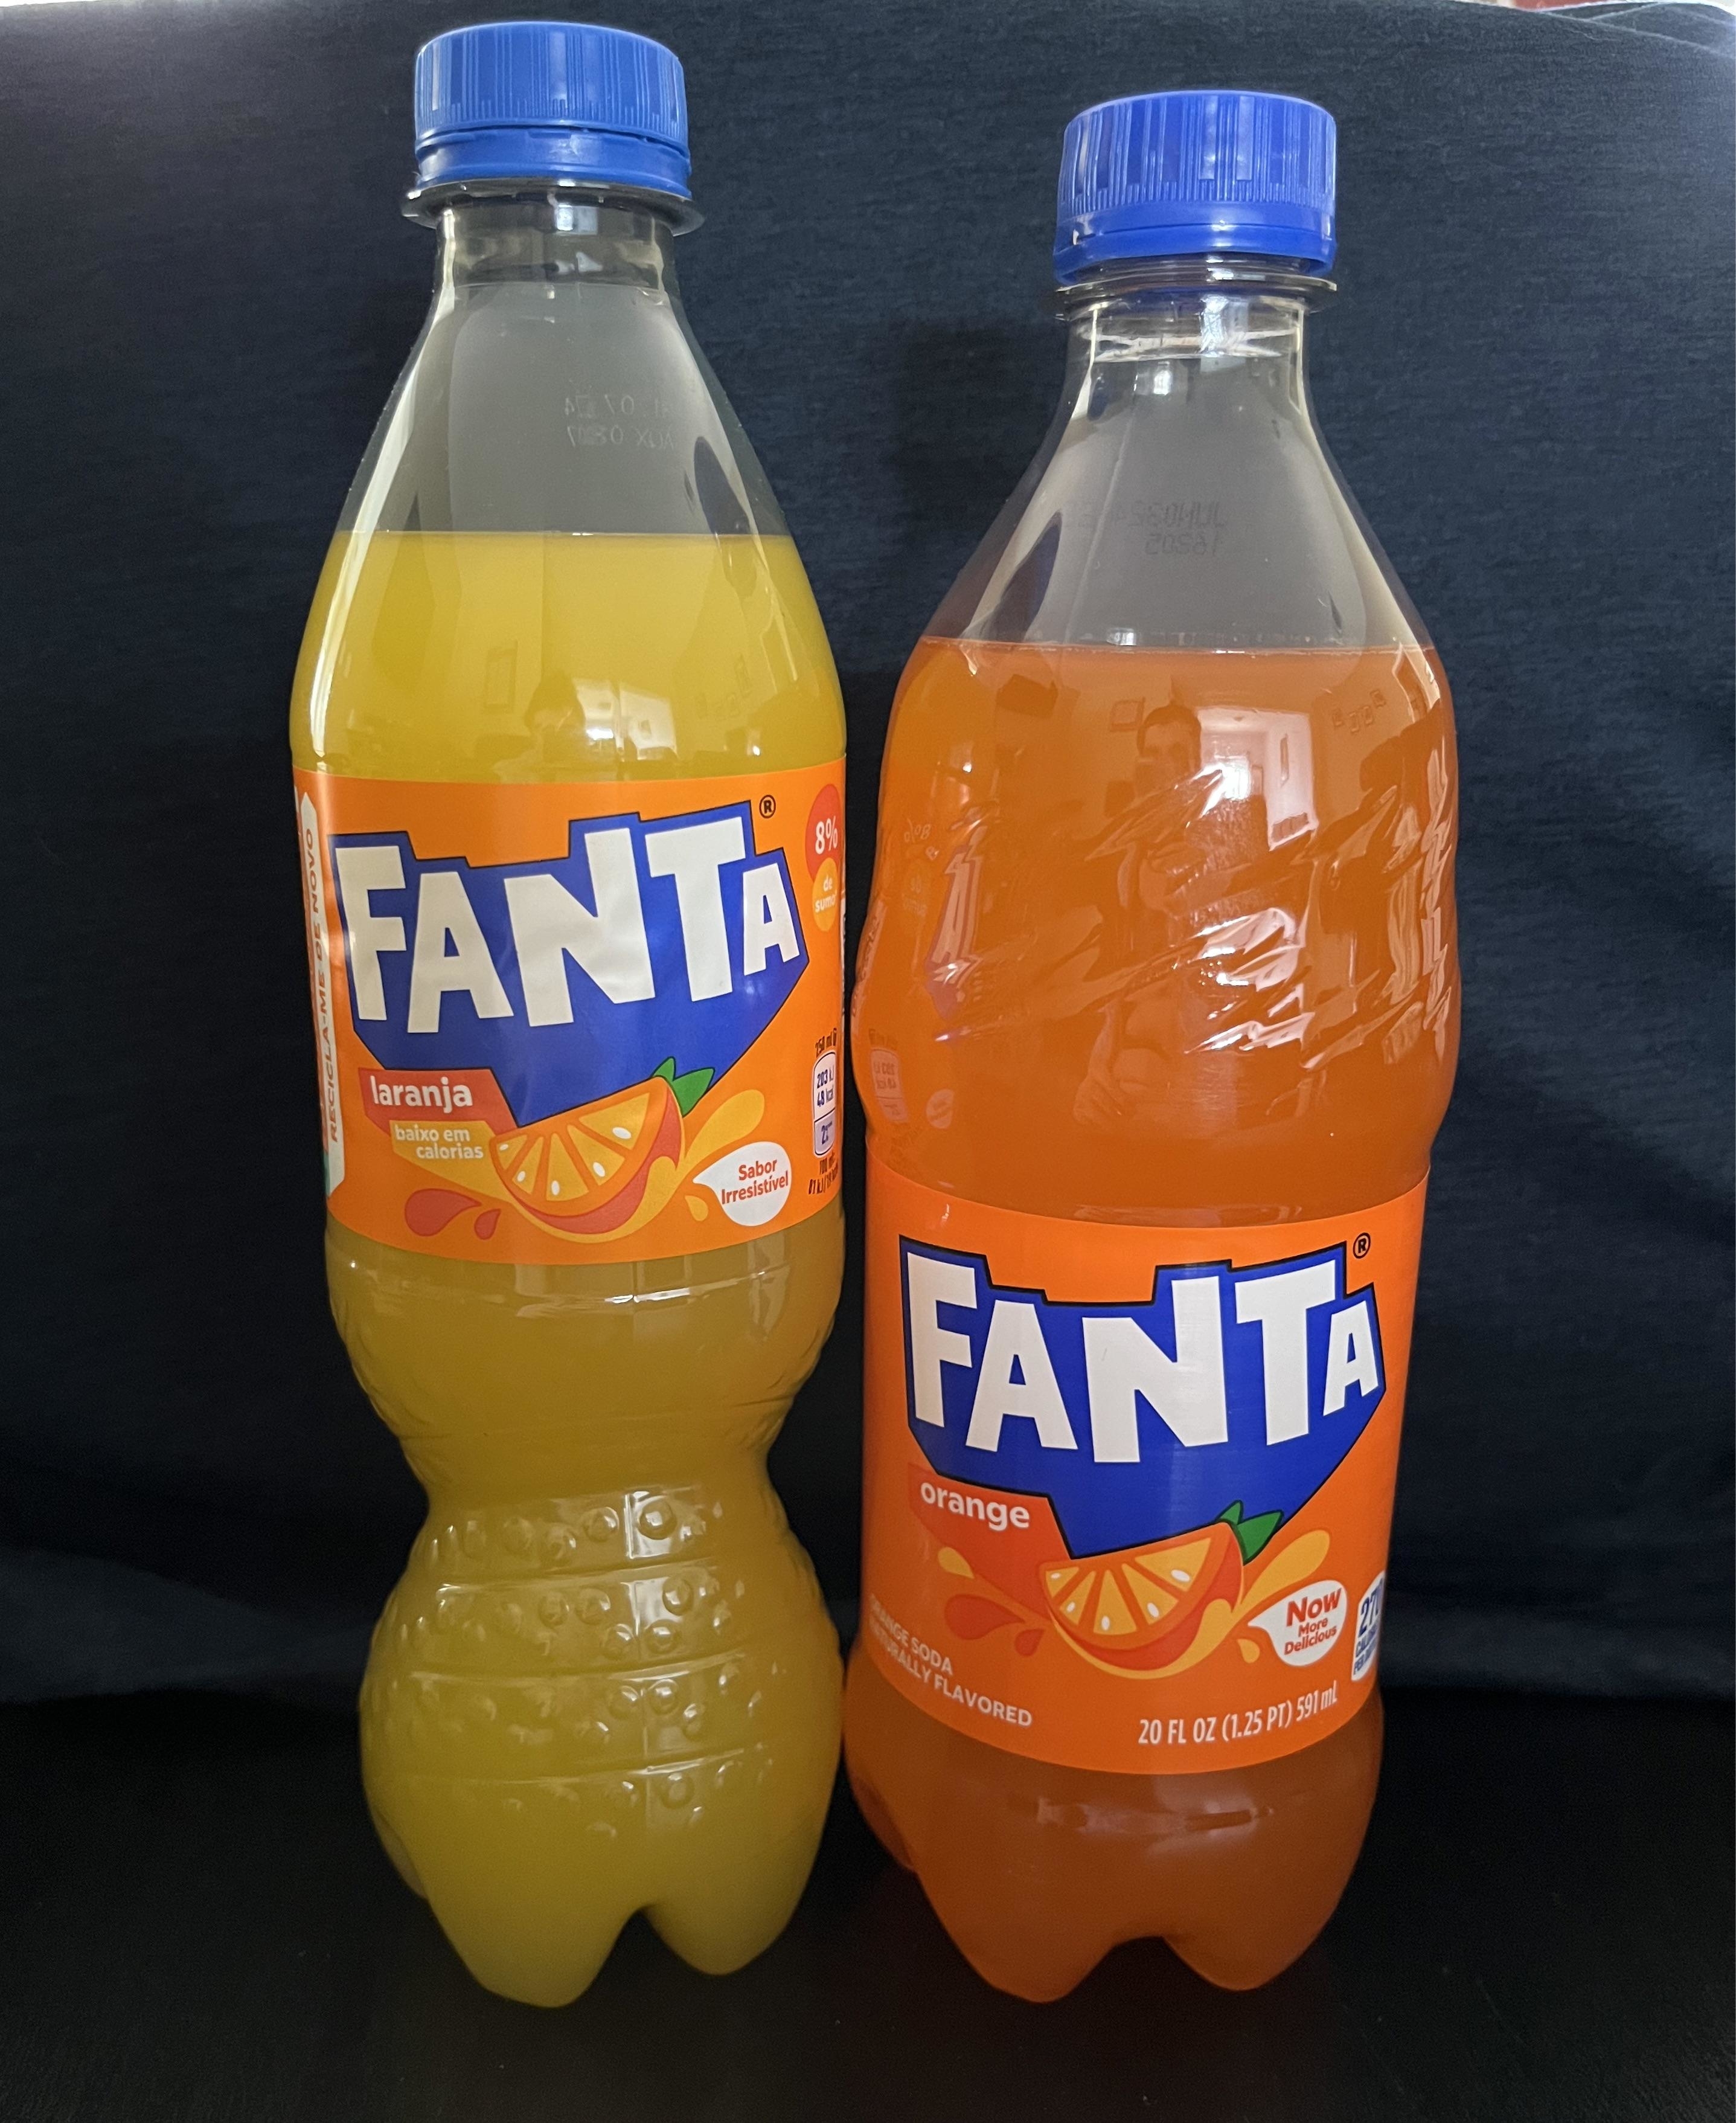 Two bottles of Fanta, one labeled Taranja and the other Orange, side by side against a black backdrop